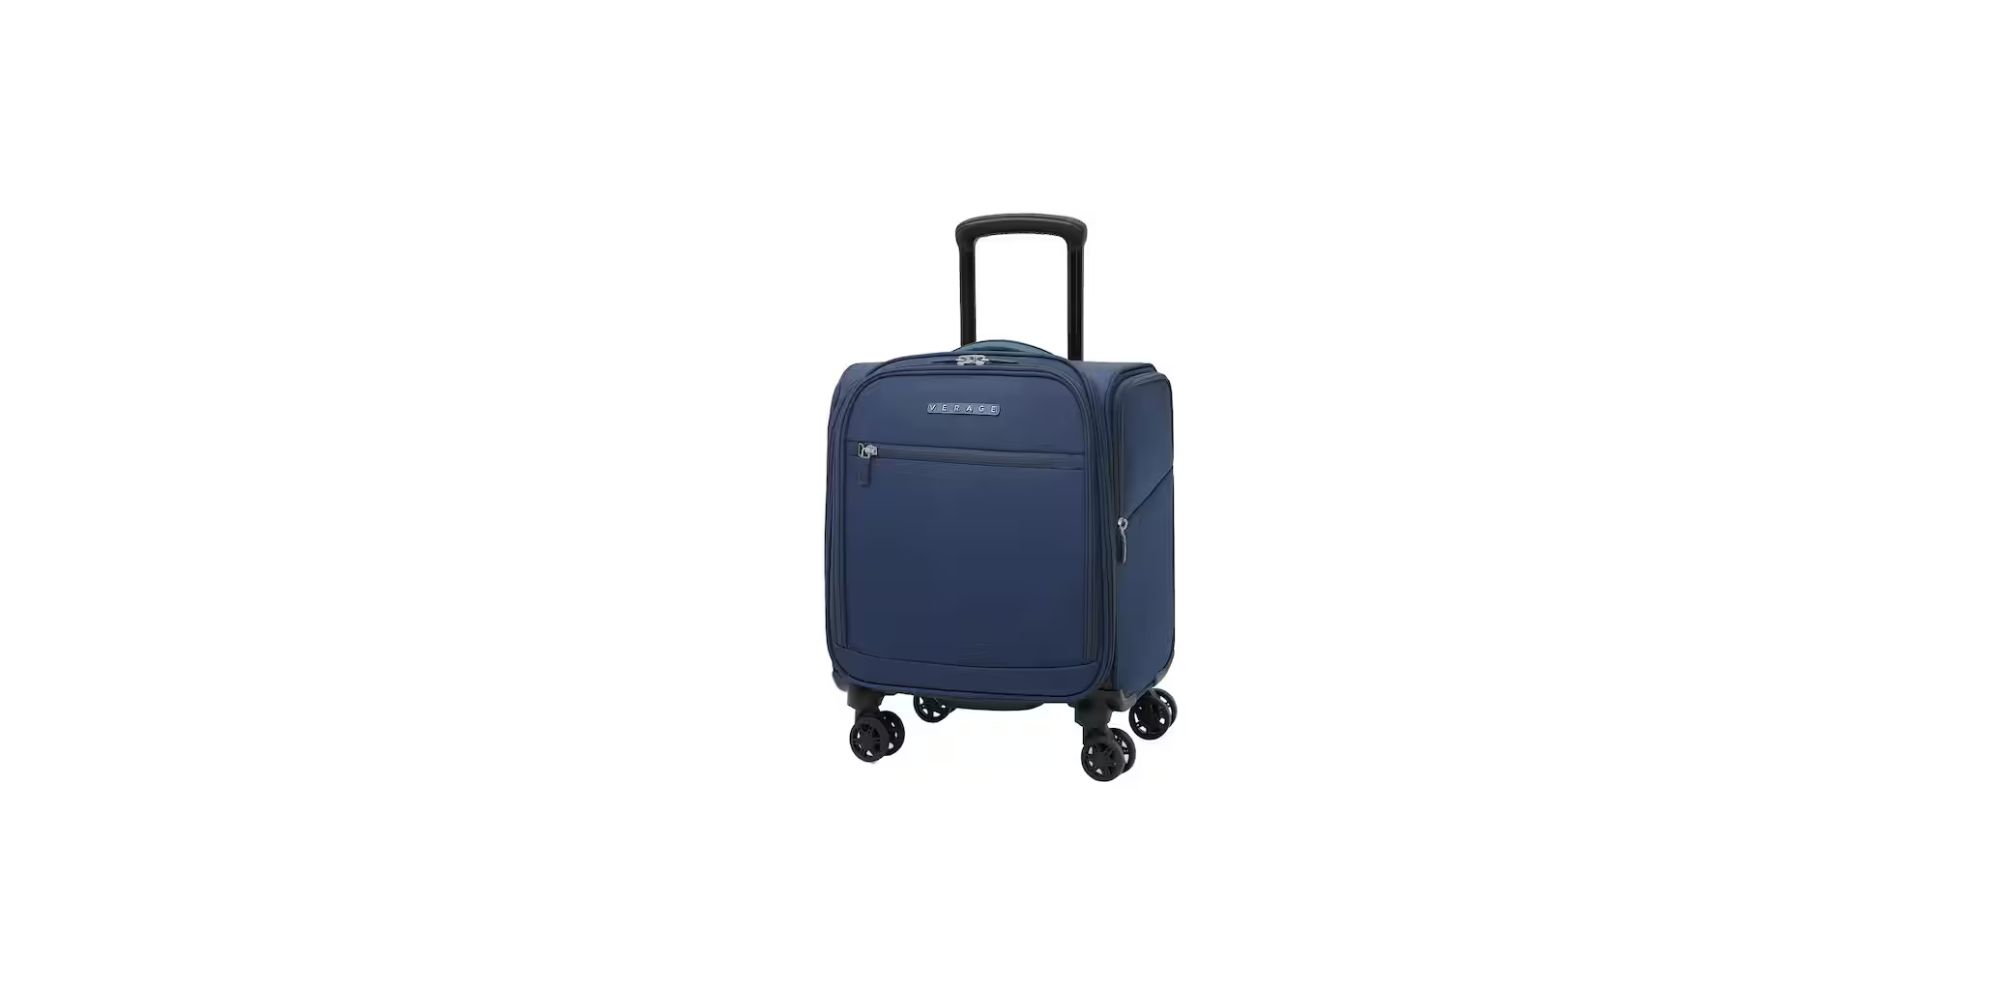  Coolife Underseat Carry On Luggage Suitcase Softside  Lightweight Rolling Travel Bag Spinner Suitcase Compact Upright 4 Dual  Wheel Bag